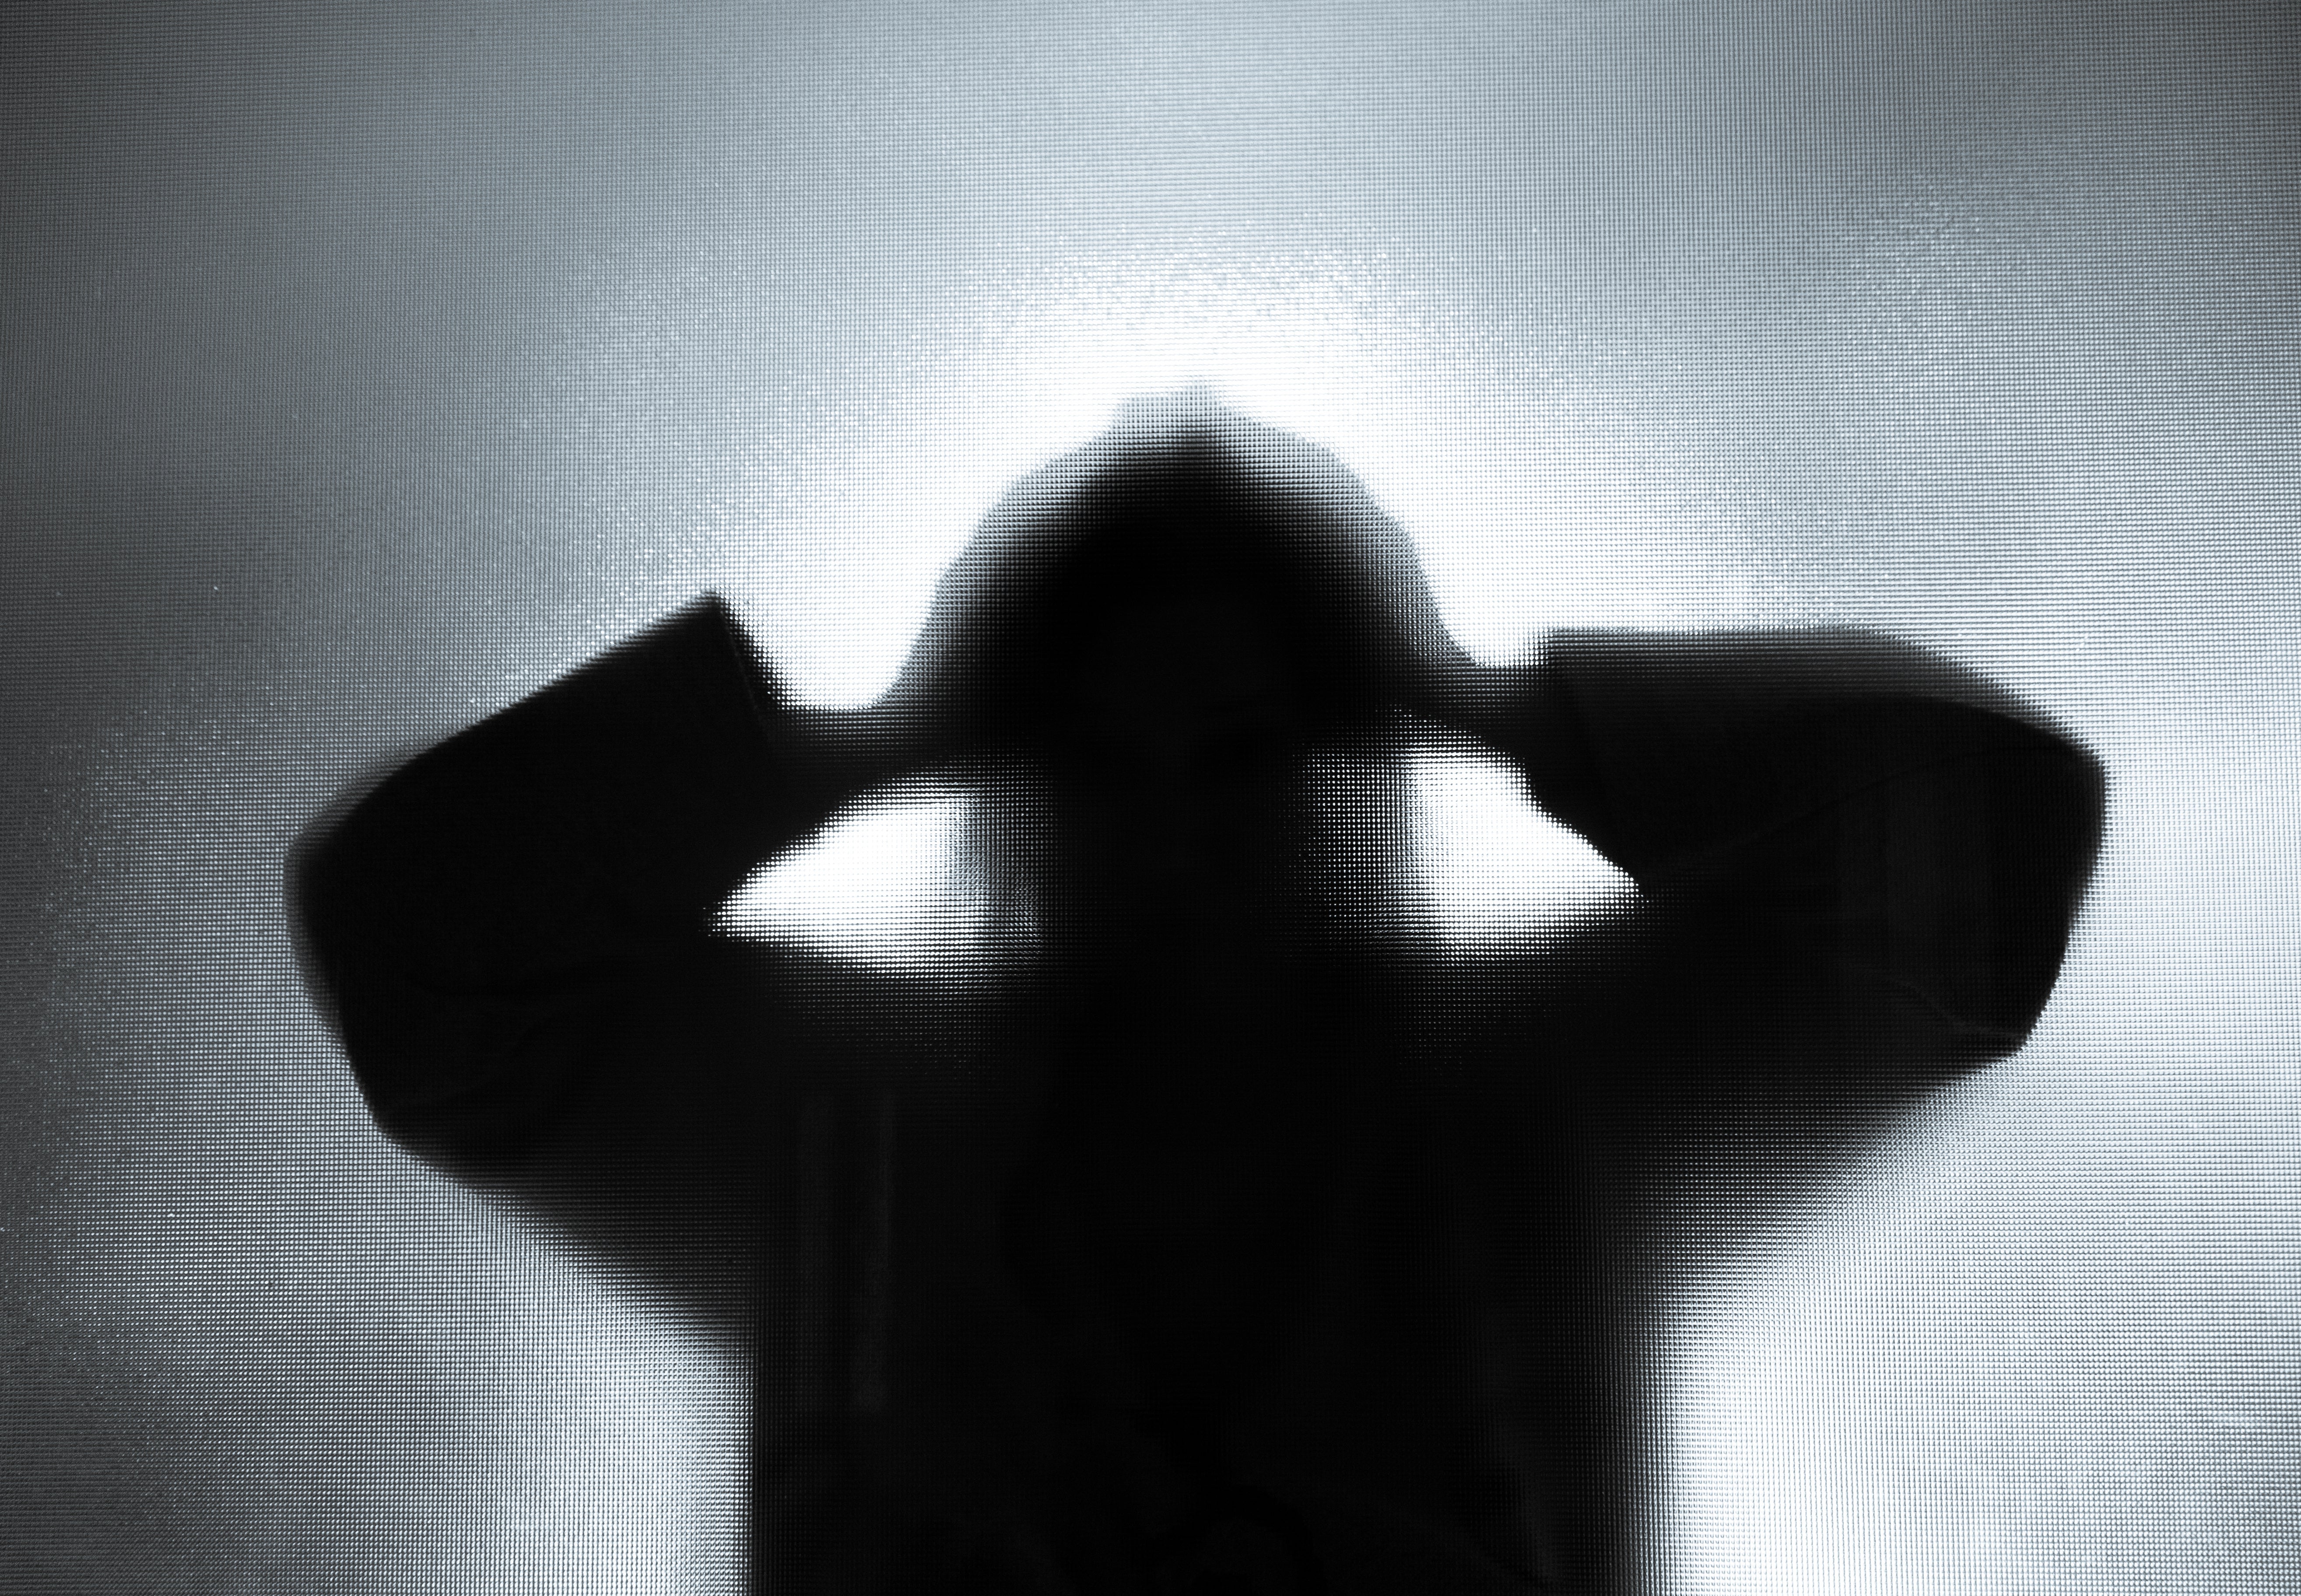 Silhouette of a woman lifting arms and holding her head in her hands in despair.